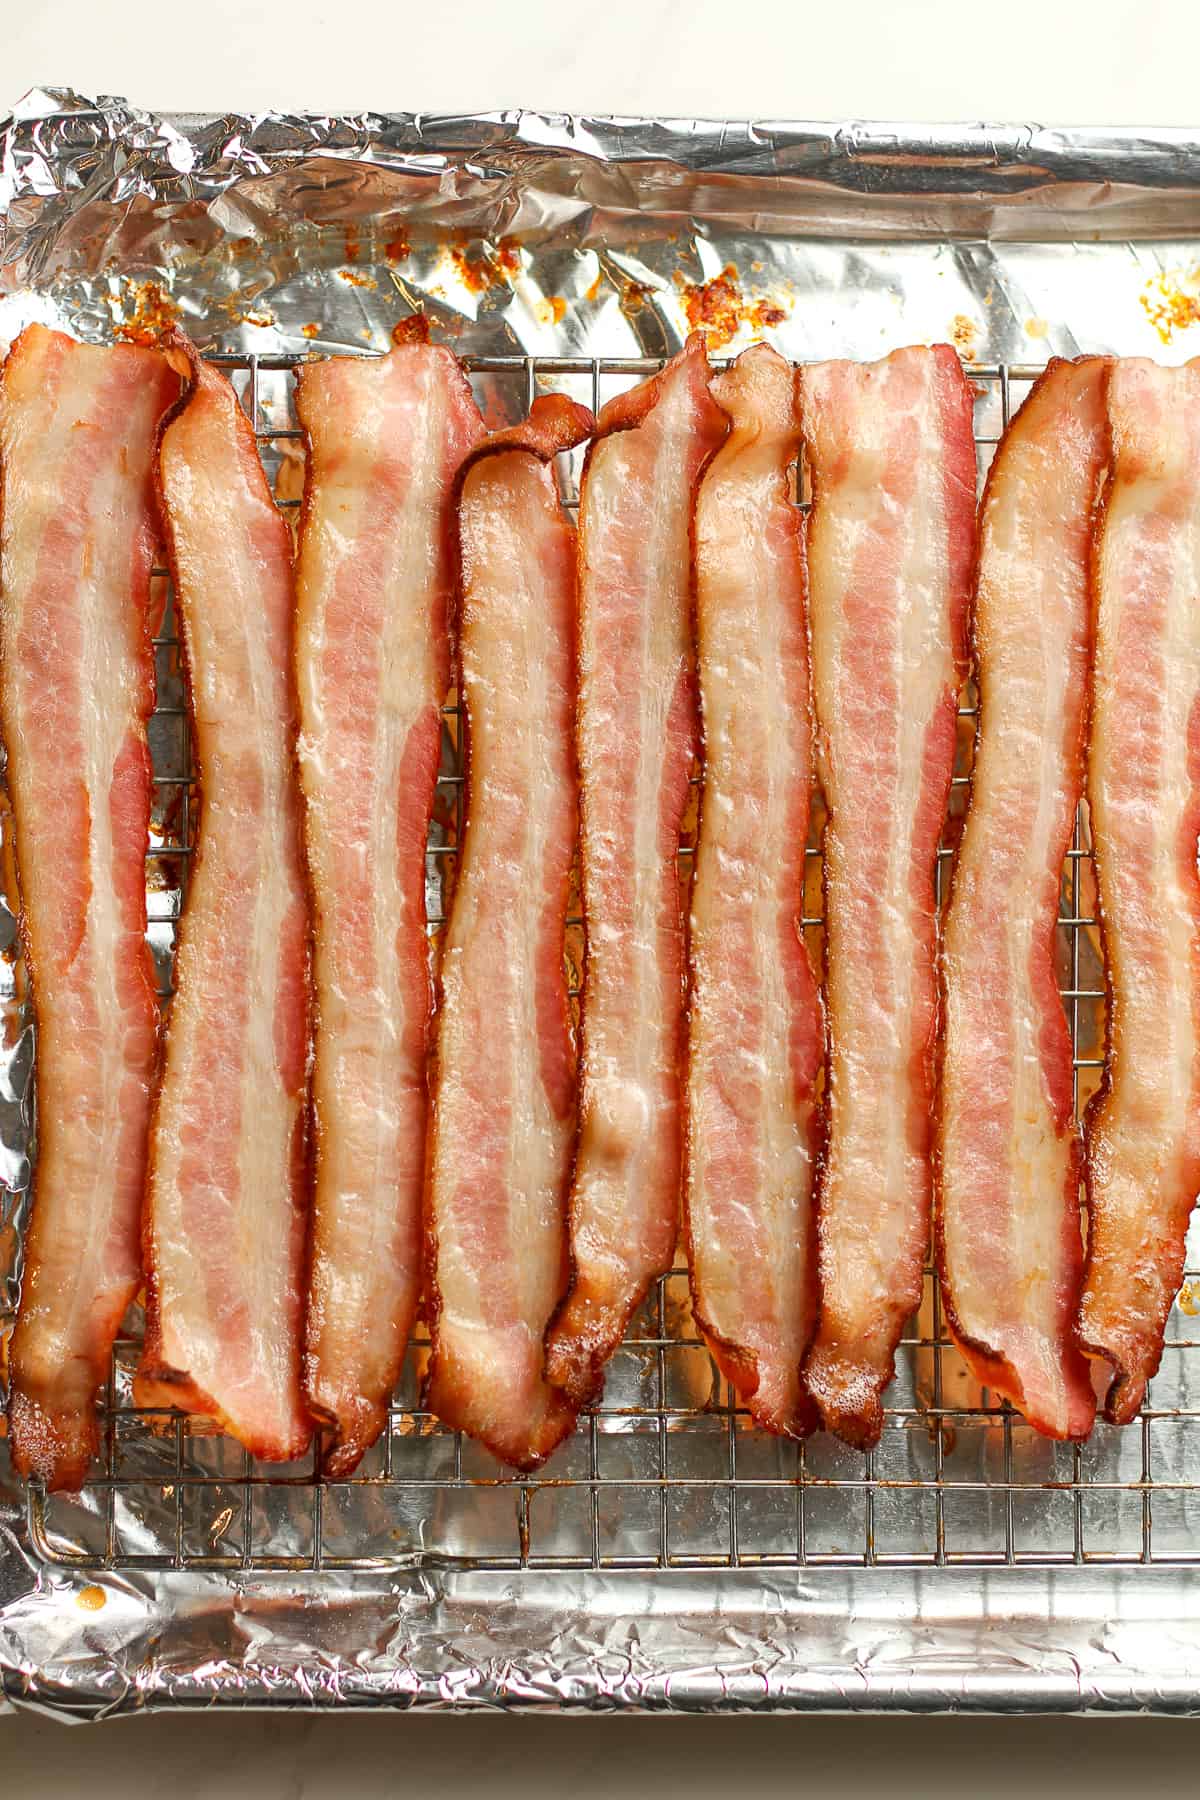 A shot of partially cooked bacon.